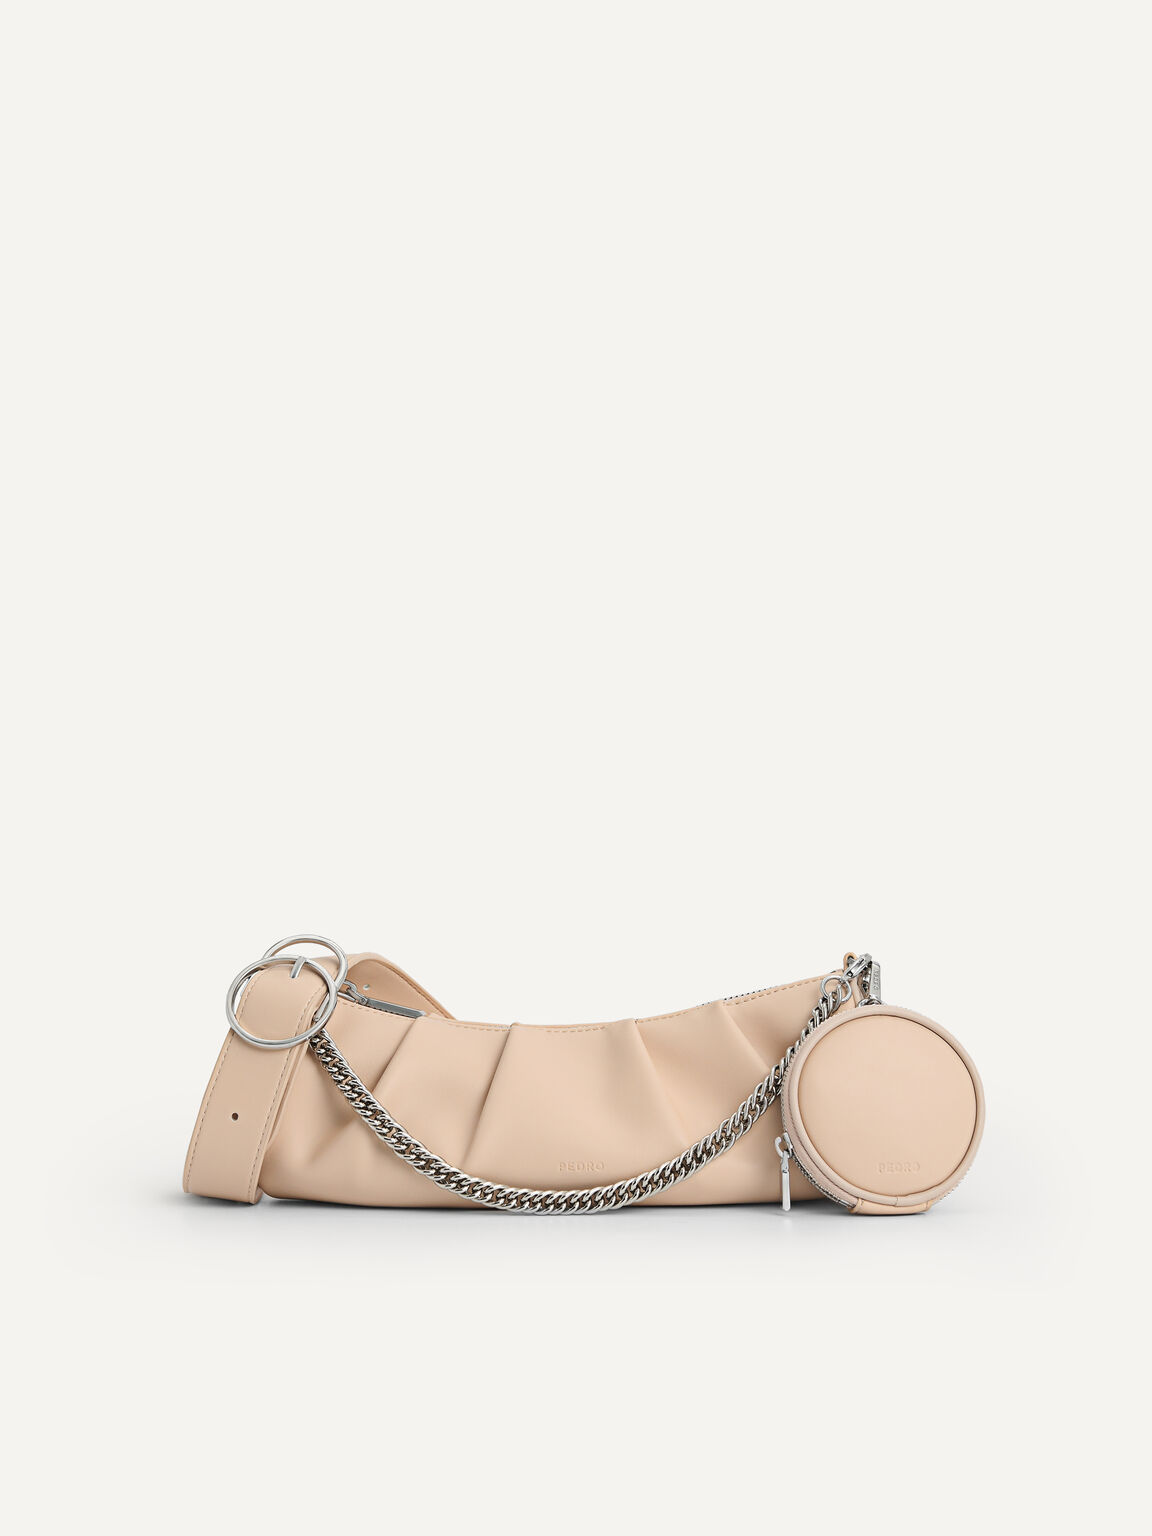 Chain Detailed Ruched Bowling Bag, Nude, hi-res